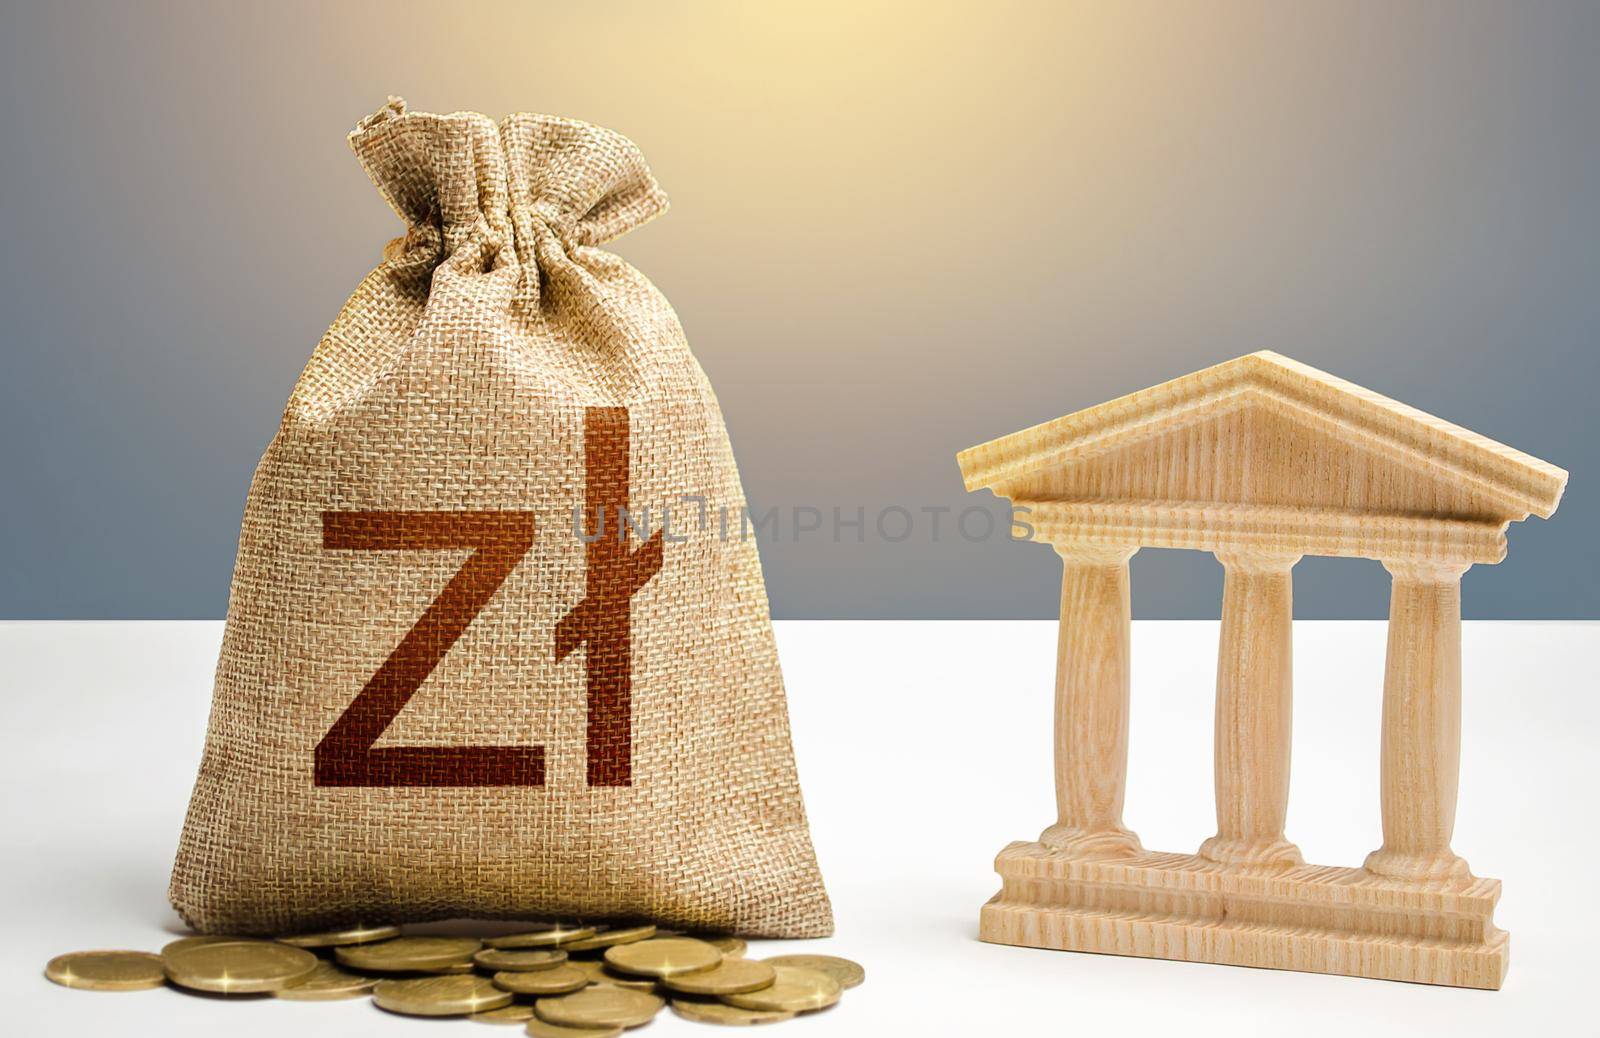 Polish zloty money bag and bank / government building. Budgeting, national financial system. Resource allocation. Support businesses in crisis. Lending loans, placing deposits. Monetary policy.